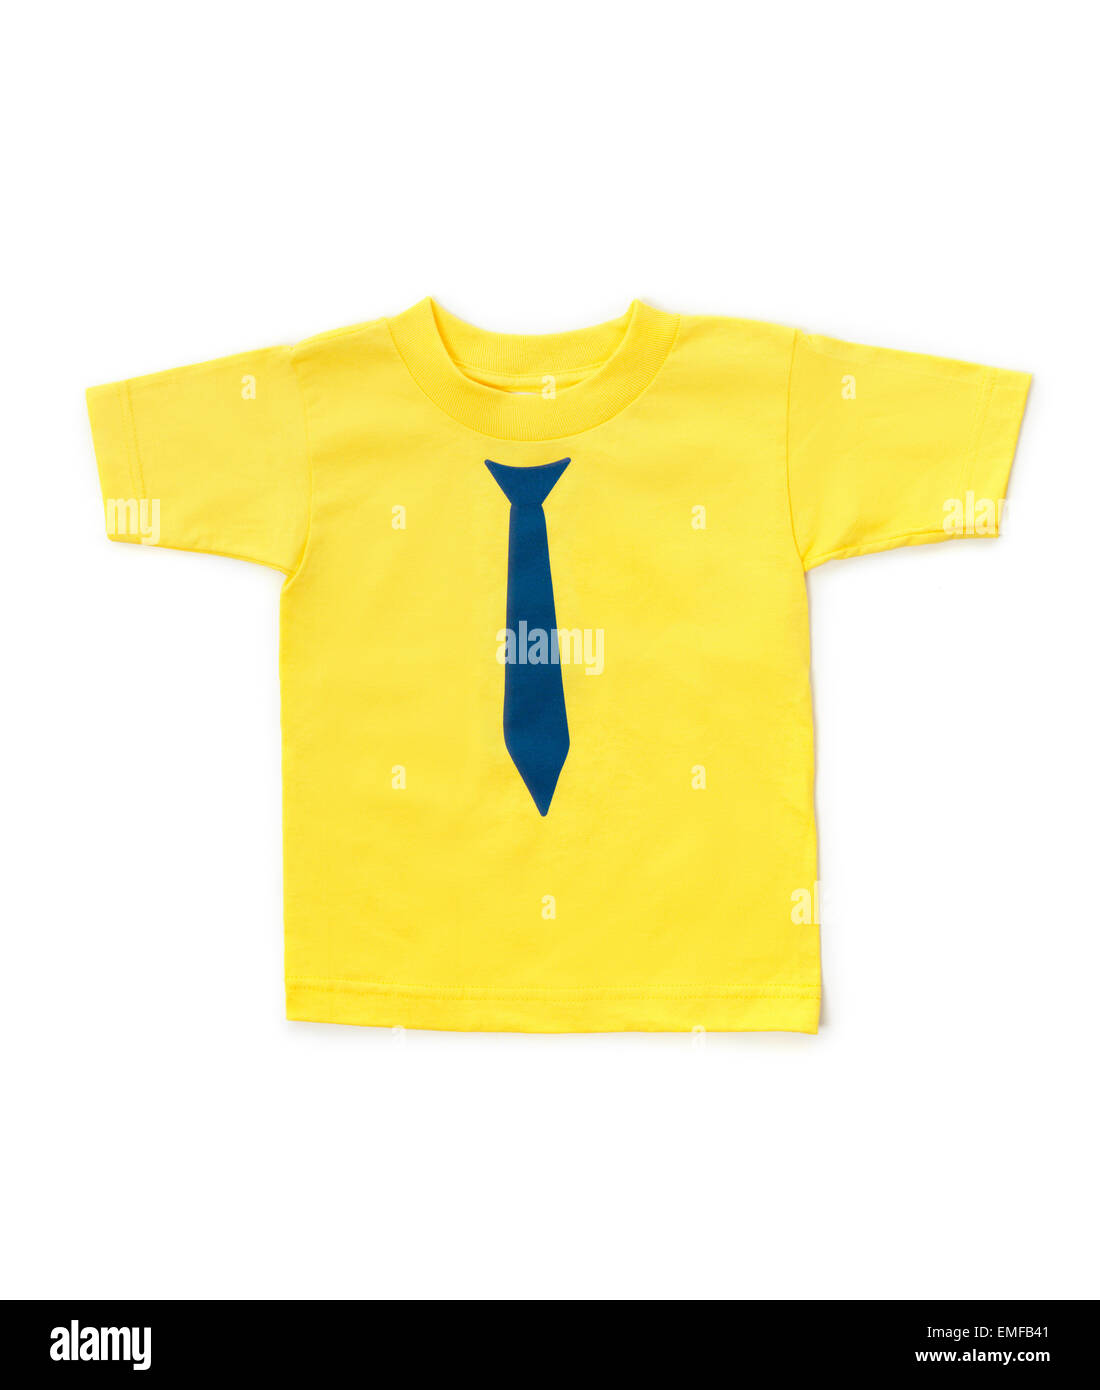 Cute yellow childrens t-shirt with necktie design isolated on white background Stock Photo